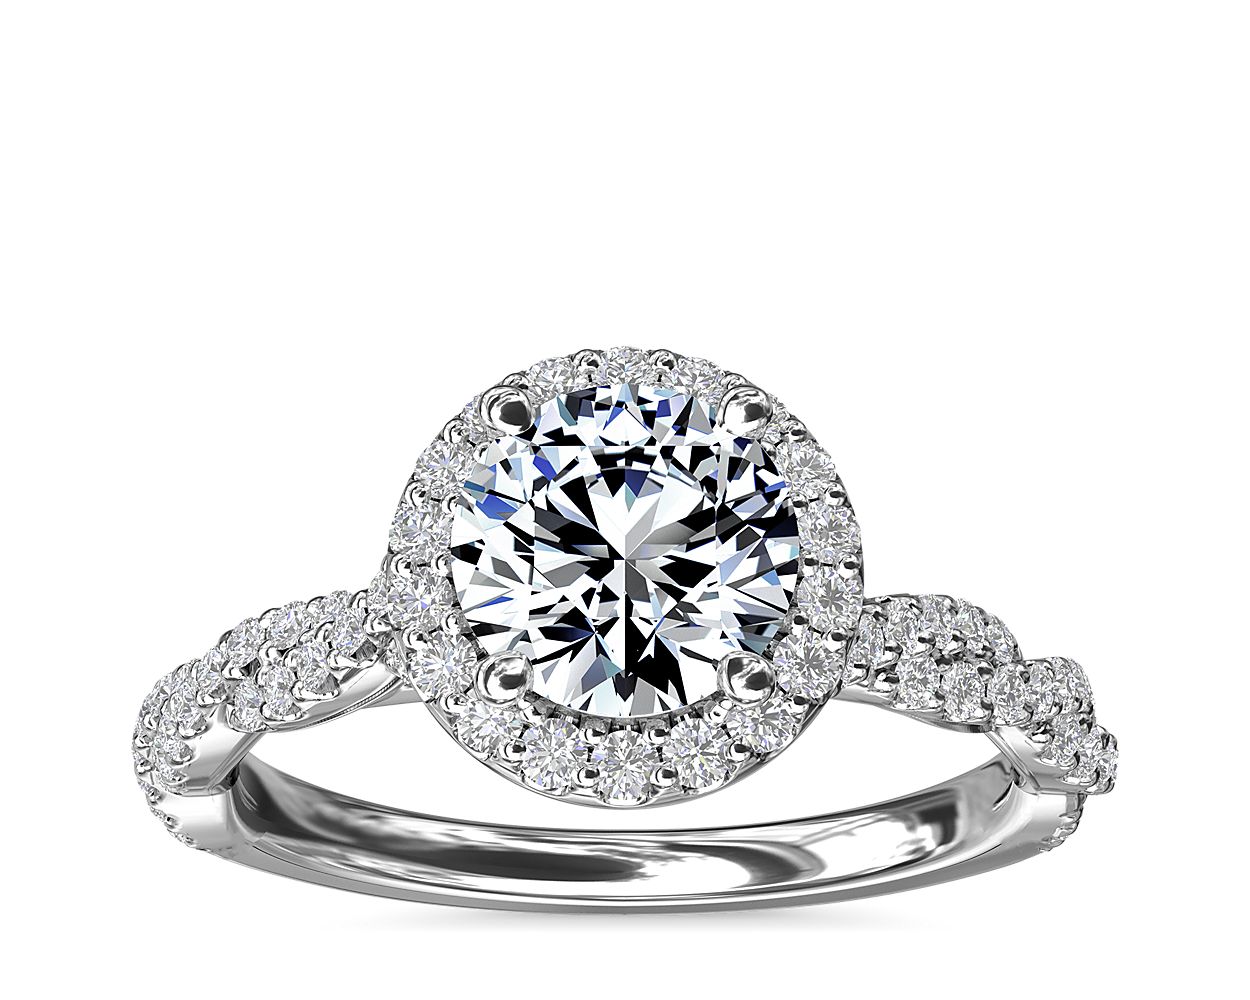 Twisted Band Halo Diamond Engagement Ring in 14k White Gold (1/3 ct. tw.)